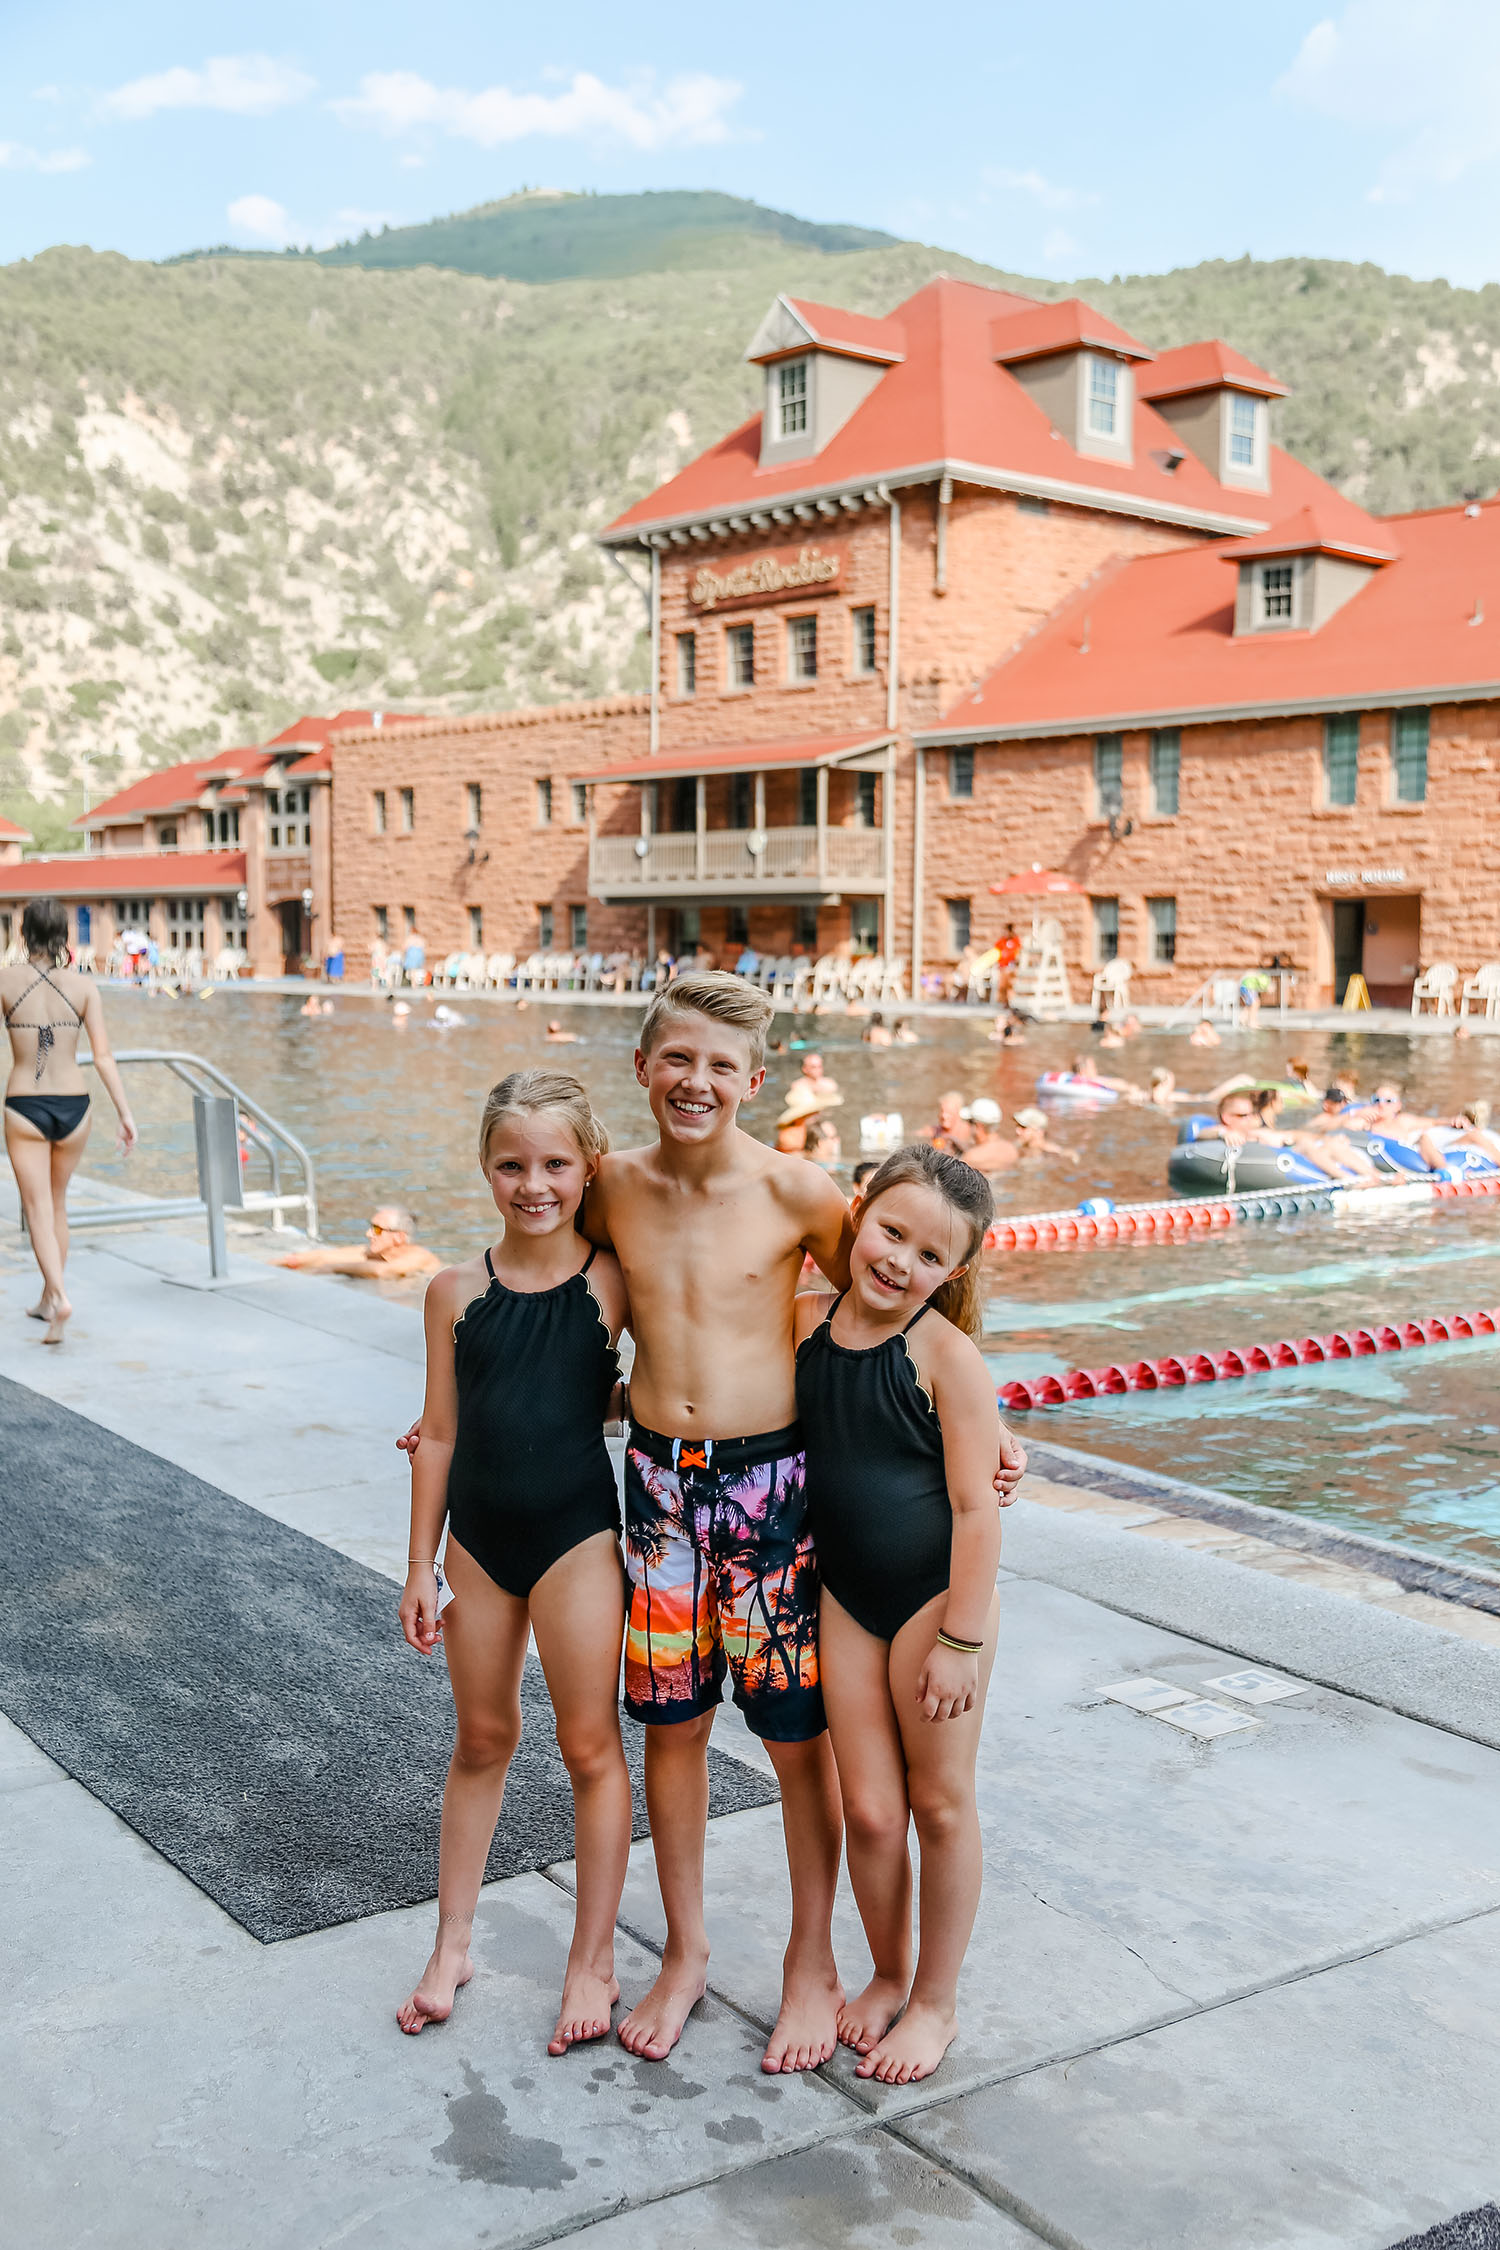 A Day Trip to Glenwood Hot Springs featured by US family travel blog, By Jen Rose